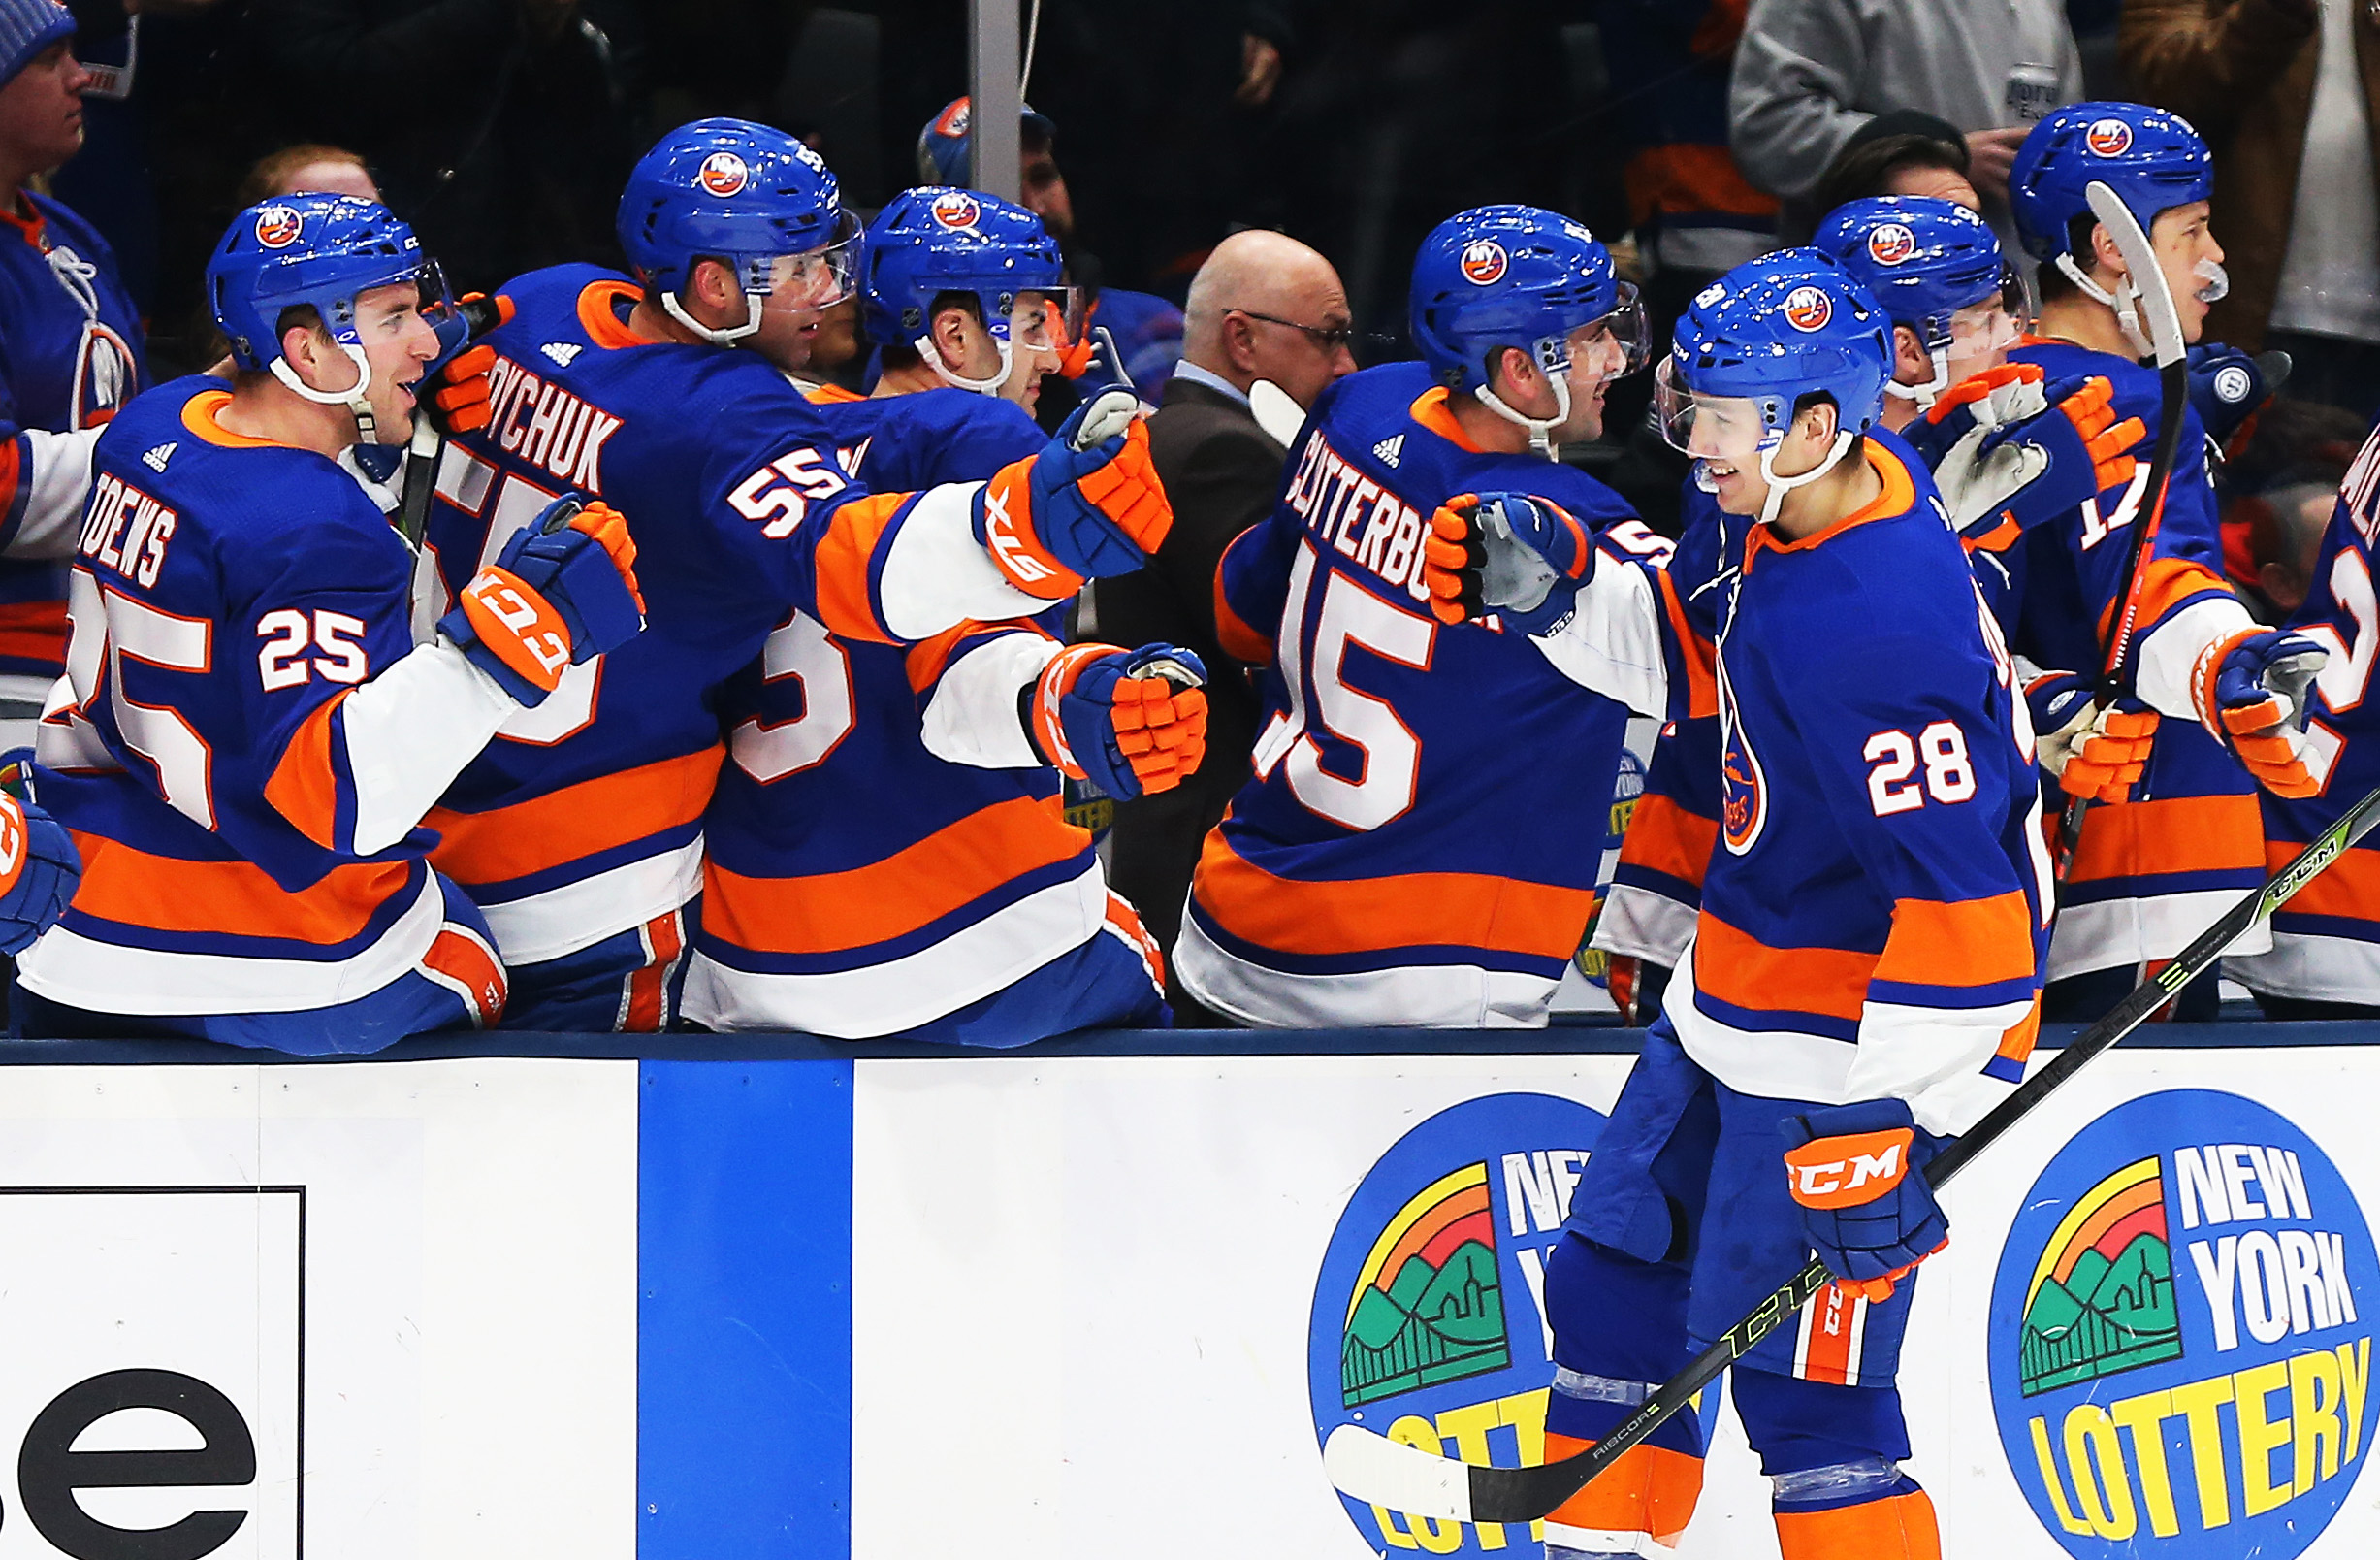 Jan 17, 2019; Uniondale, NY, USA; New York Islanders left wing Michael Dal Colle (28) celebrates with teammates on the bench after scoring a goal against the New Jersey Devils during the first period at Nassau Veterans Memorial Coliseum. Mandatory Credit: Andy Marlin-USA TODAY Sports